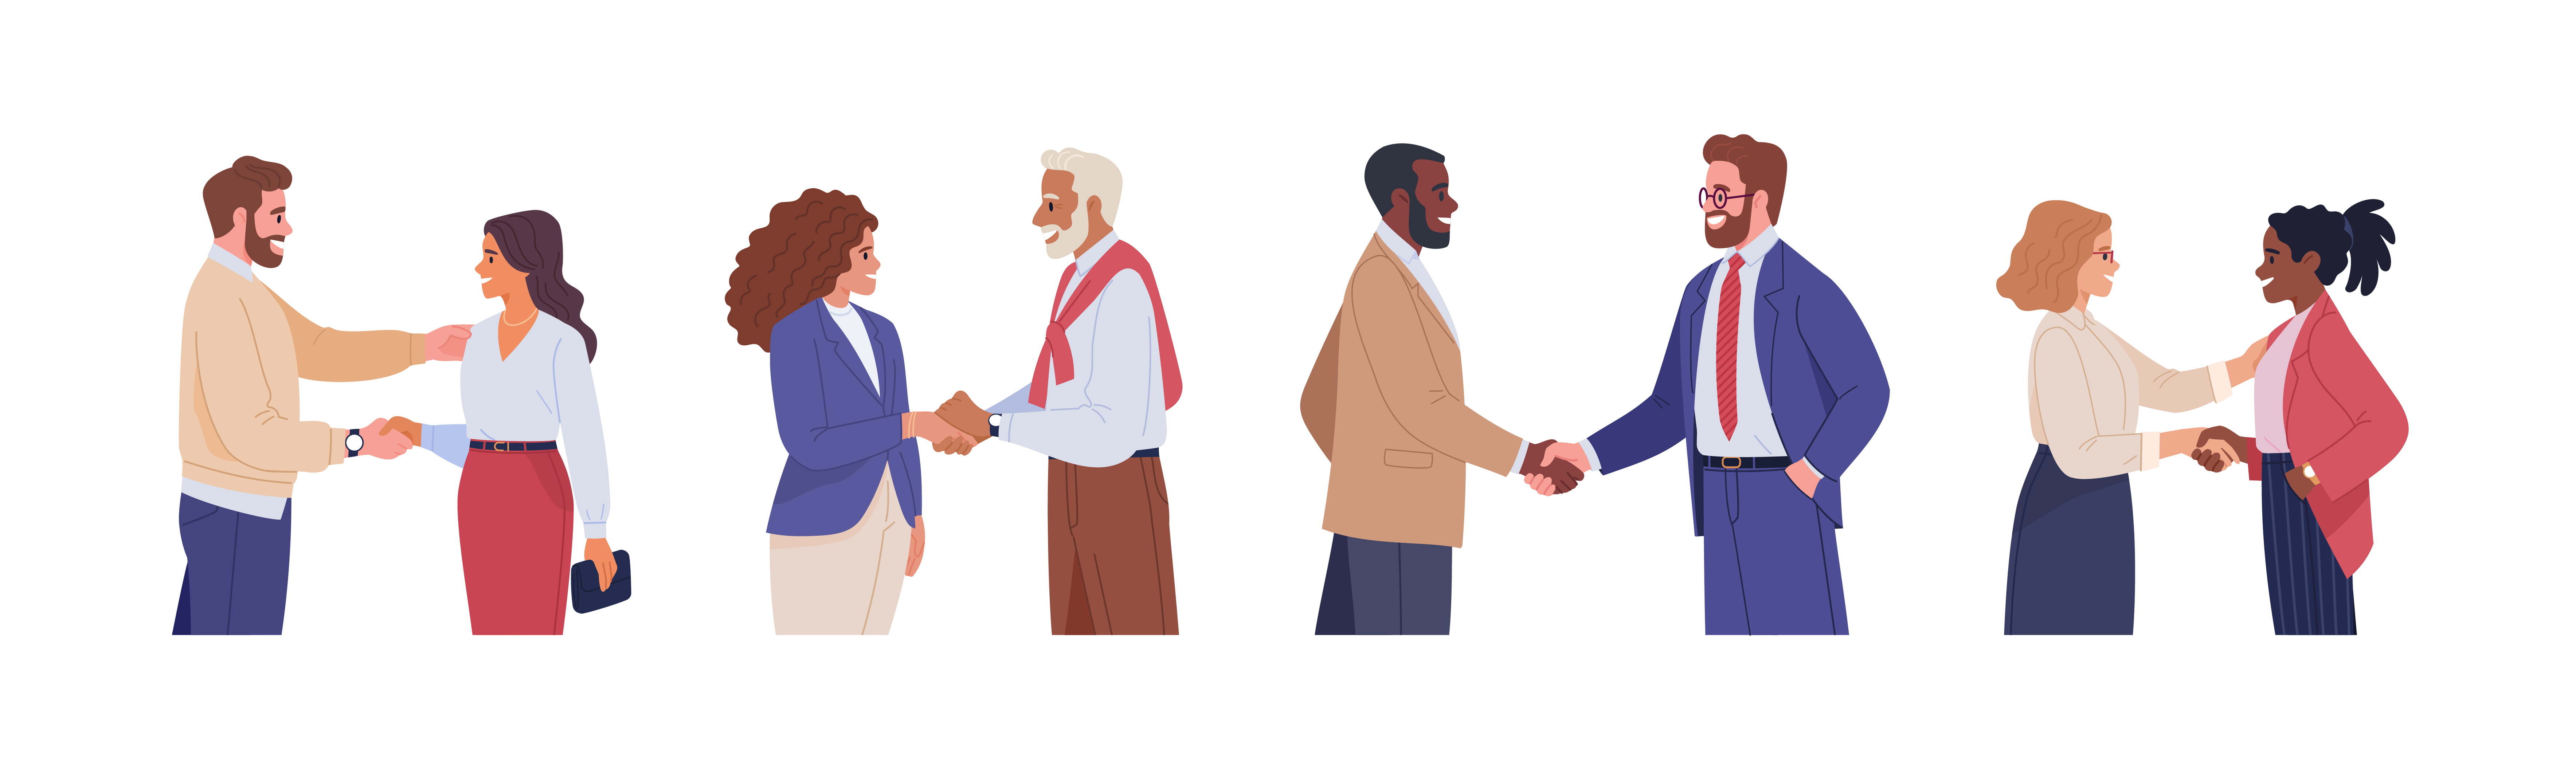 cartoon style of several people in business clothes shaking hands by nadzeya26